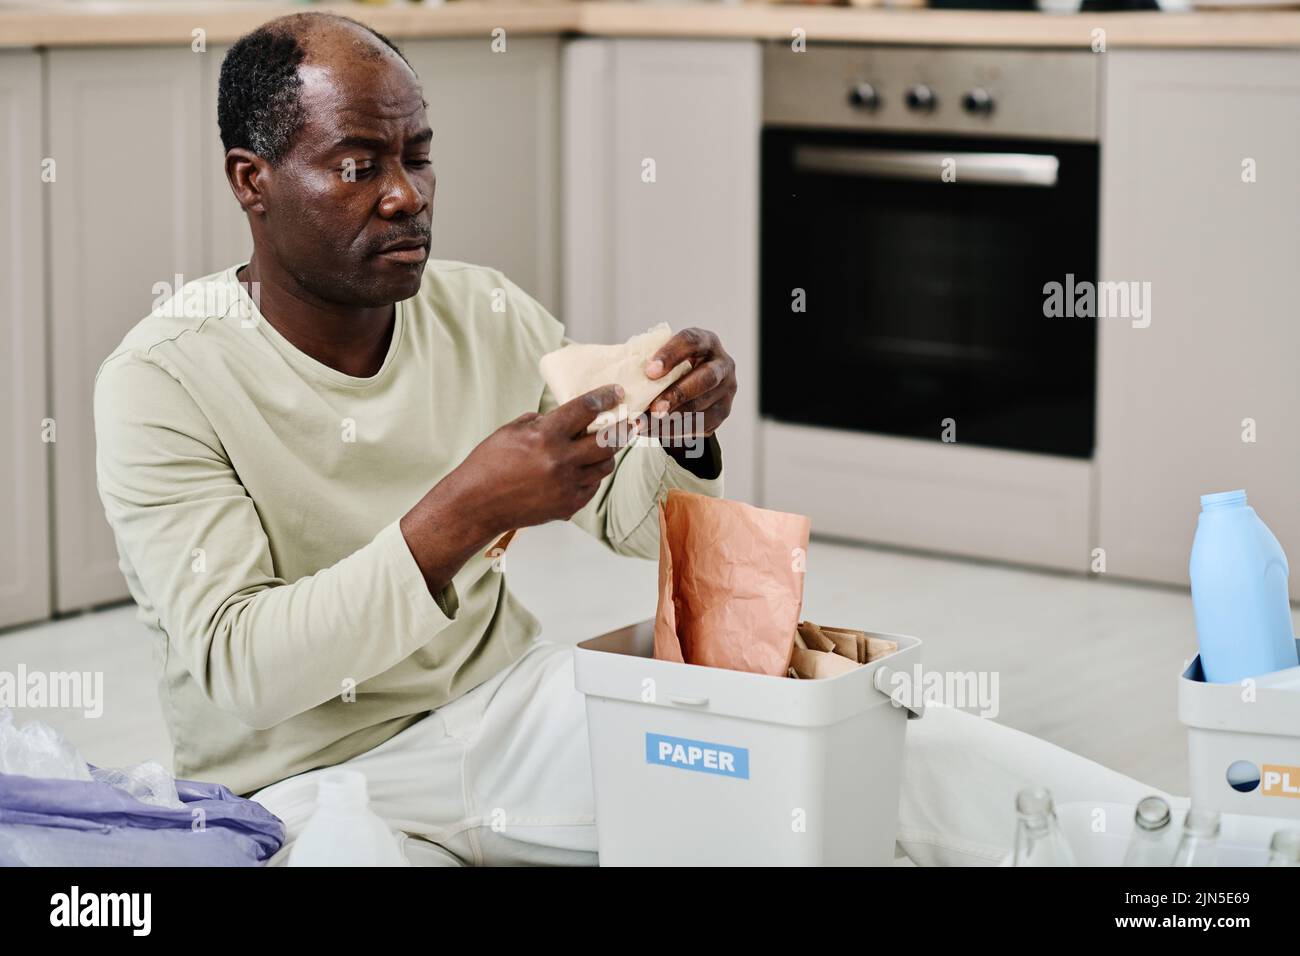 African man putting papers in container, he separating garbage in the kitchen for recycling Stock Photo